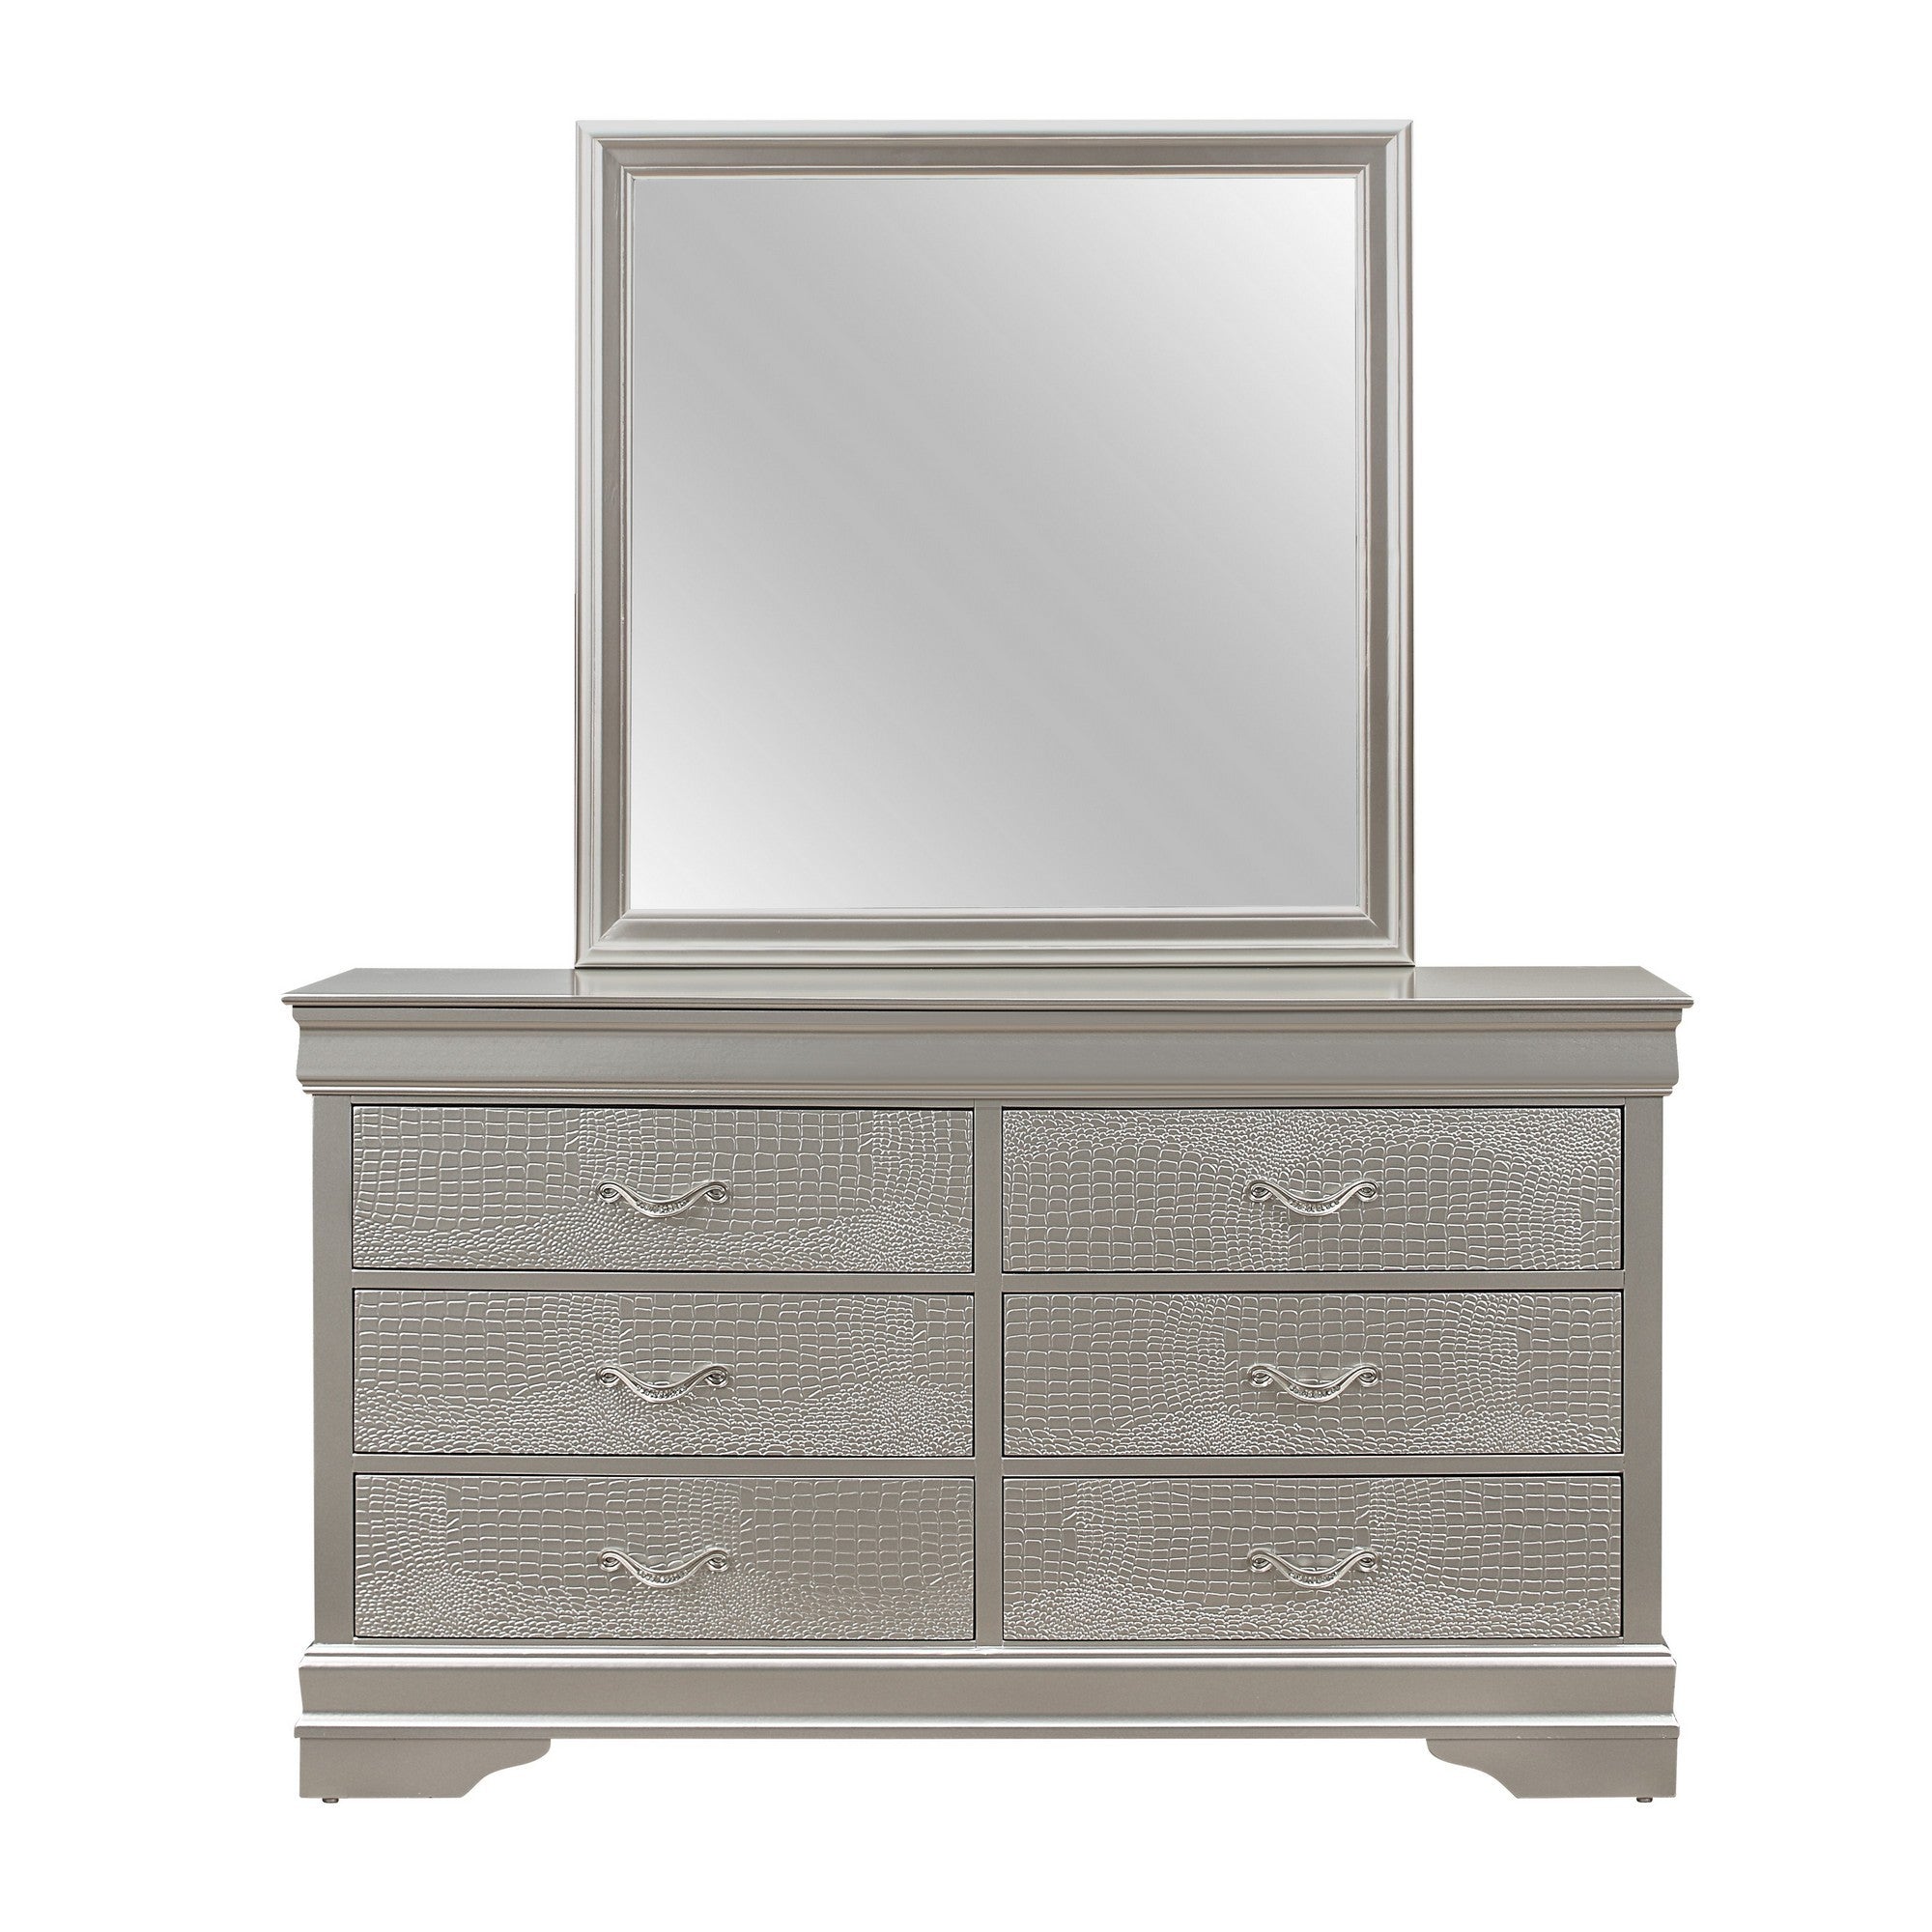 Silver Tone Dresser With 6 Spacious Interior Drawers